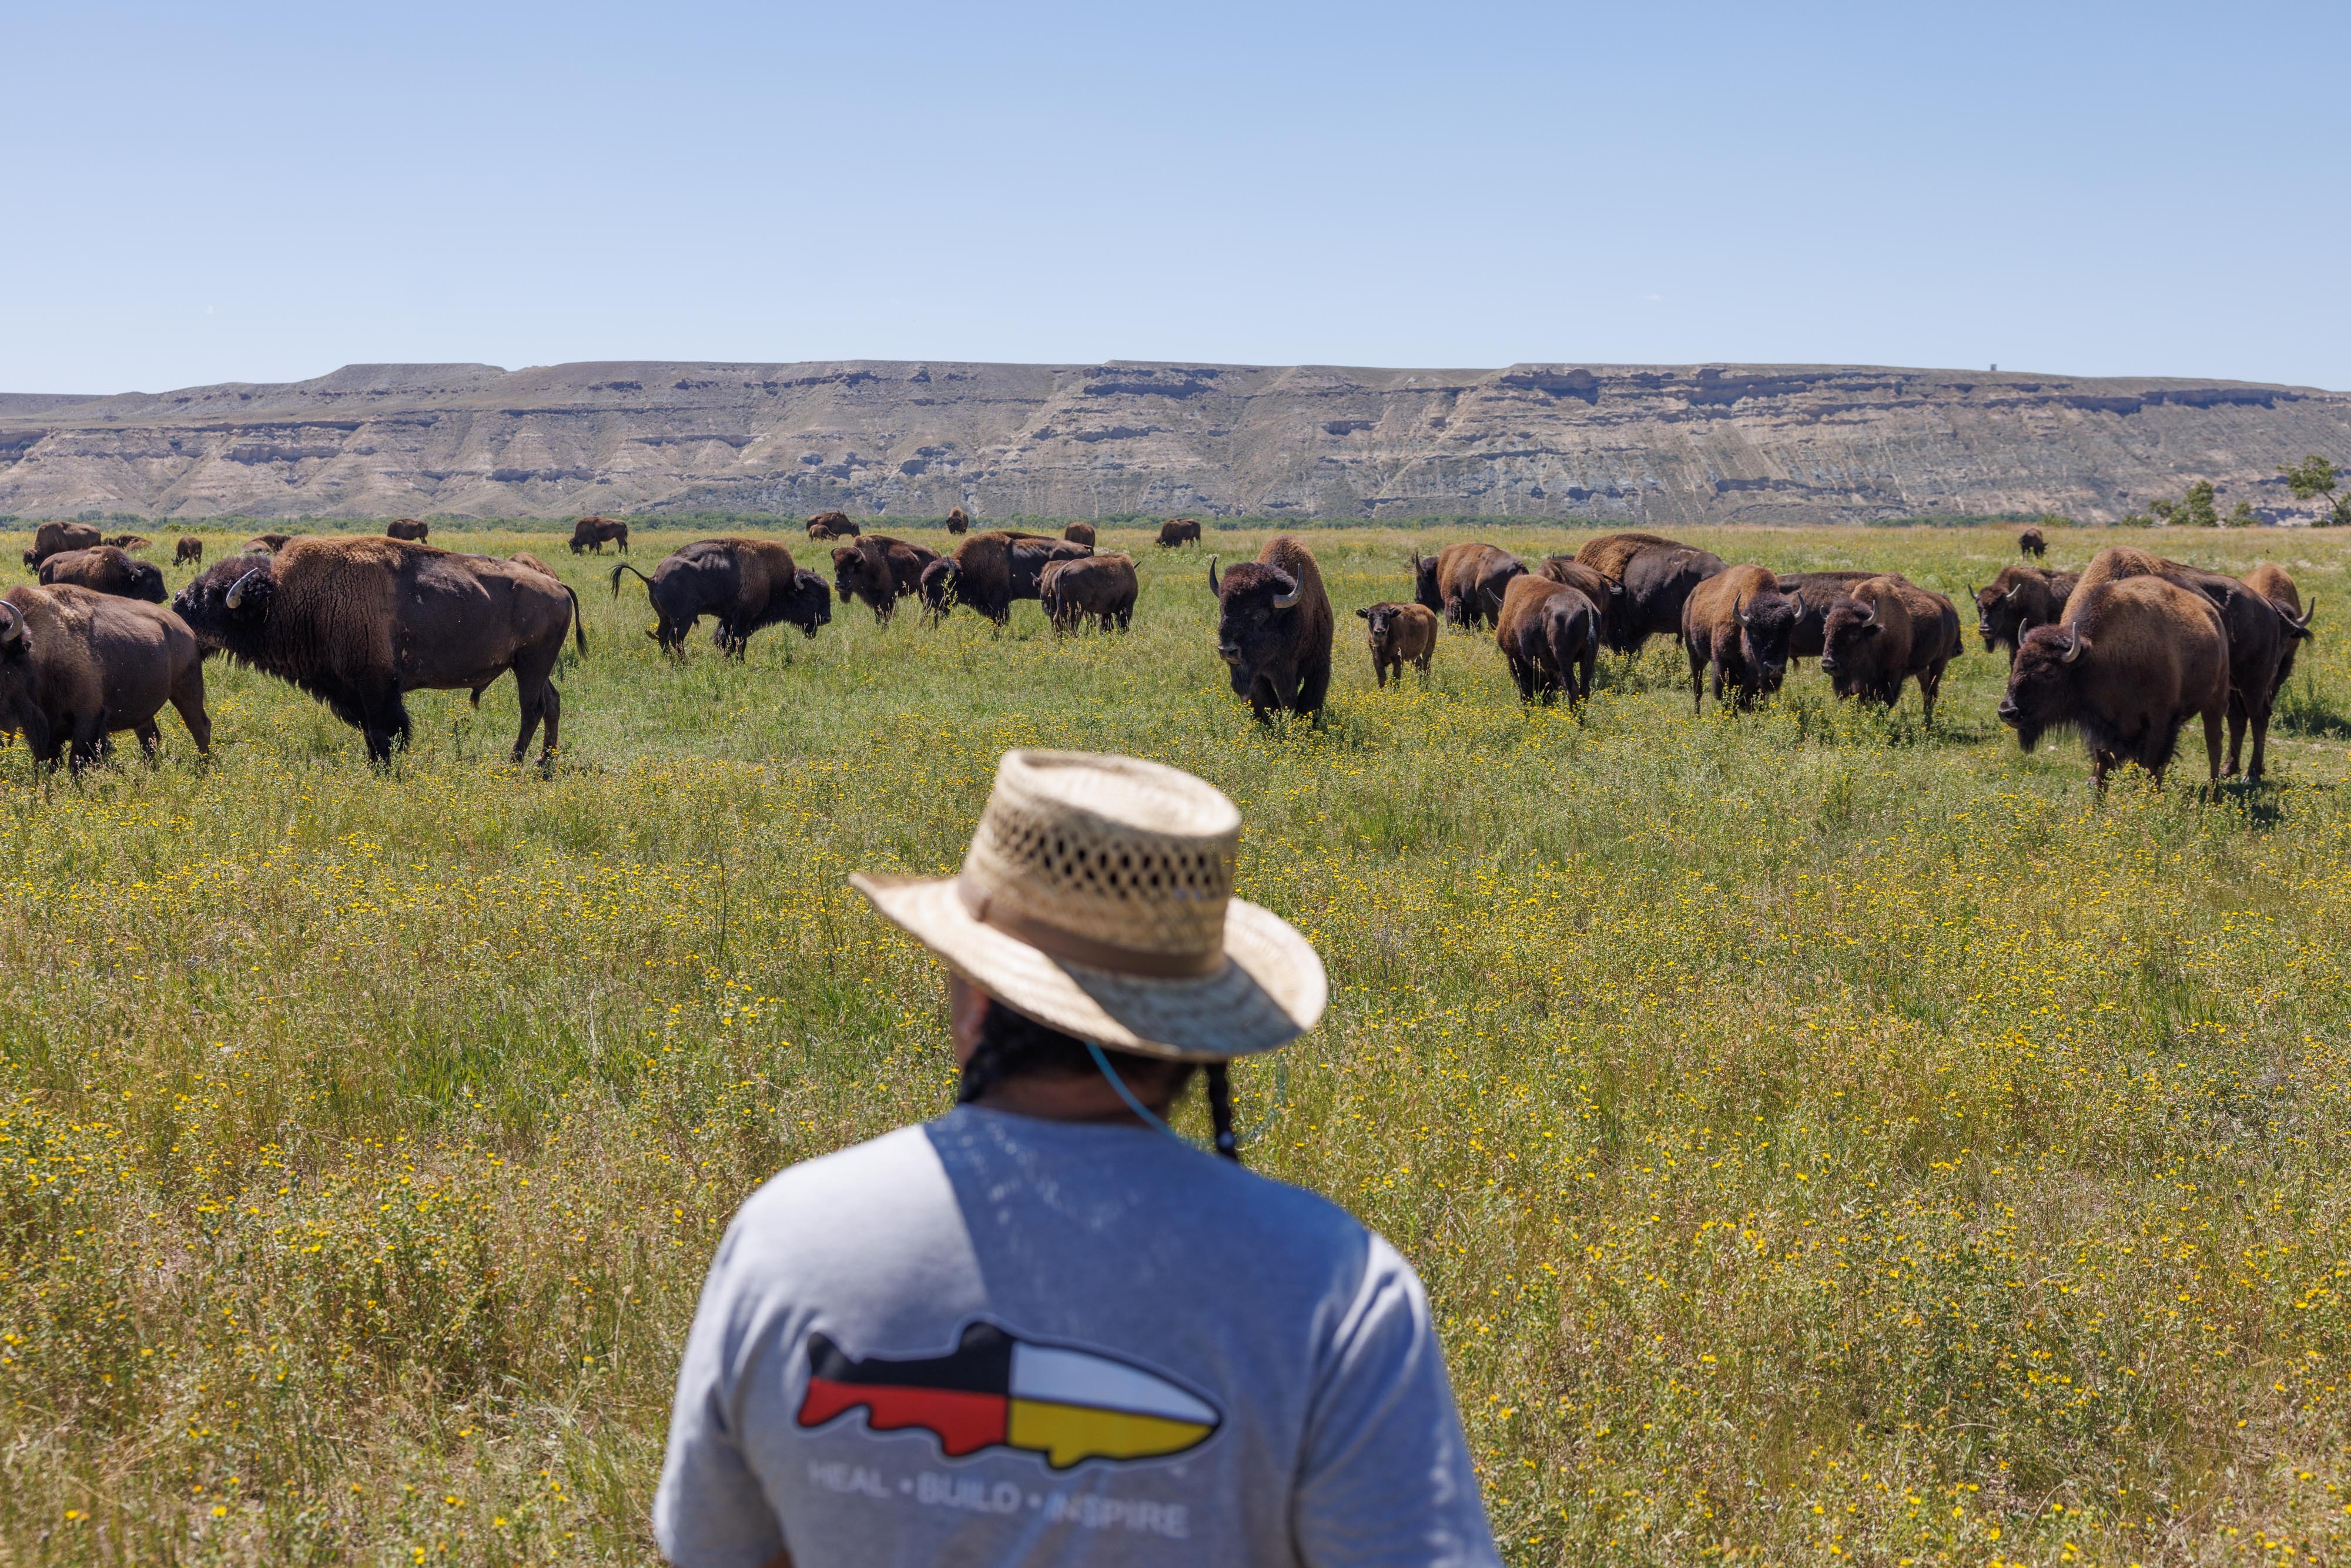 How The Eastern Shoshone Are Bringing Back Wild Buffalo | HuffPost Impact